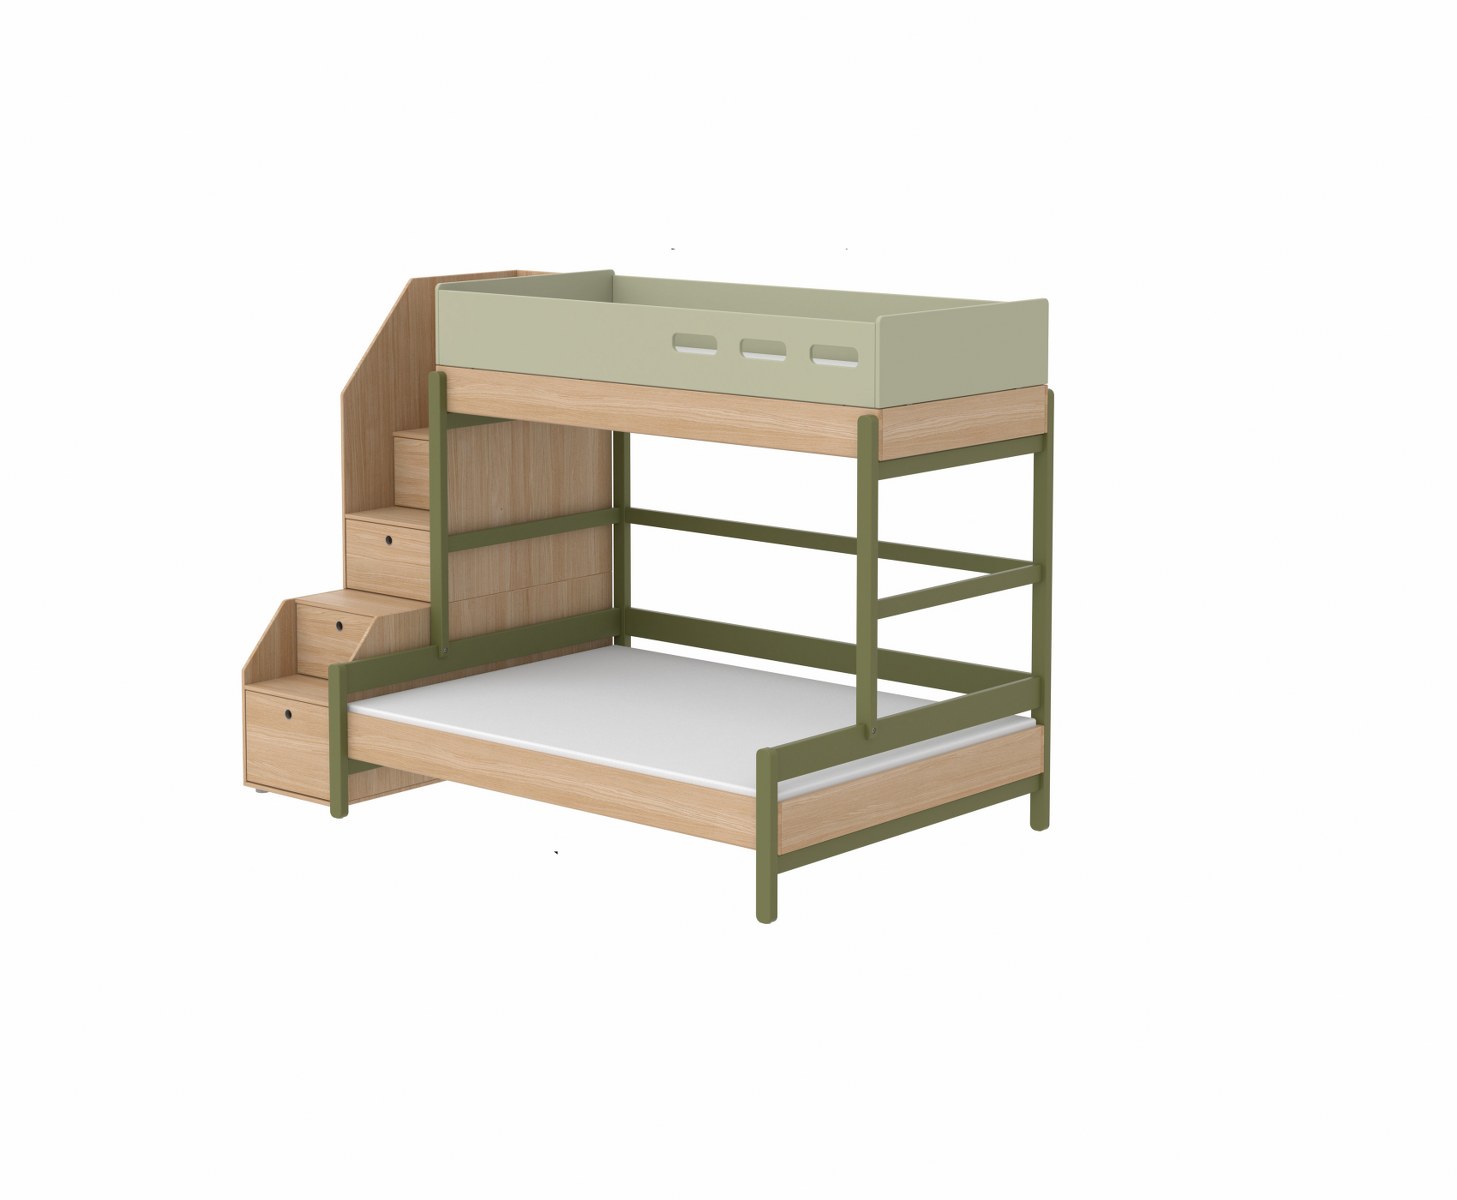 Popsicle Family Bed W Storage, Popsicle Furniture Bunk Bed